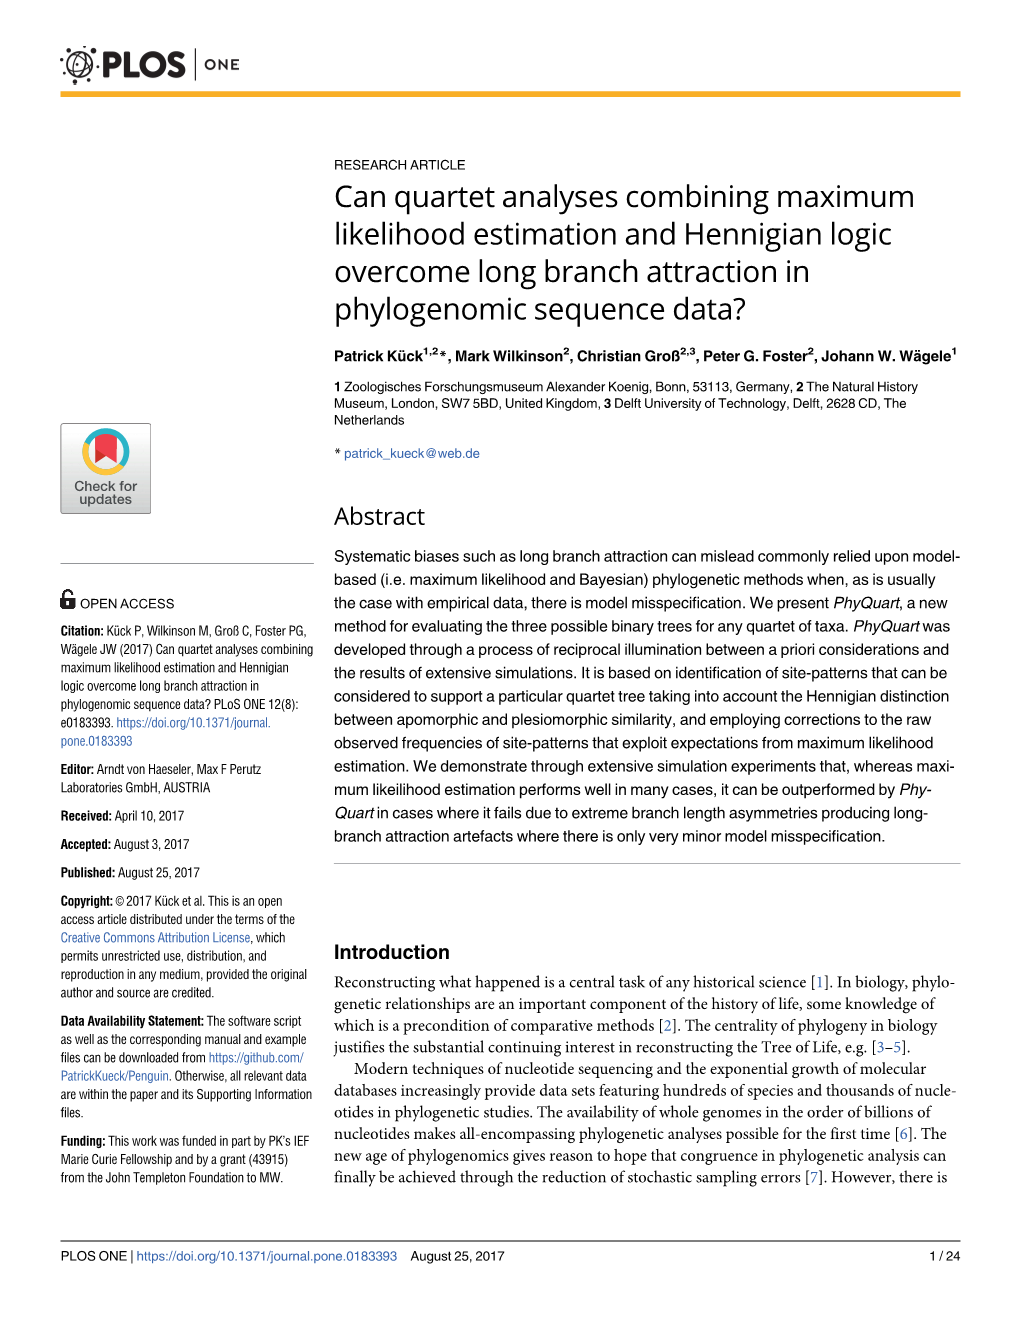 Can Quartet Analyses Combining Maximum Likelihood Estimation and Hennigian Logic Overcome Long Branch Attraction in Phylogenomic Sequence Data?